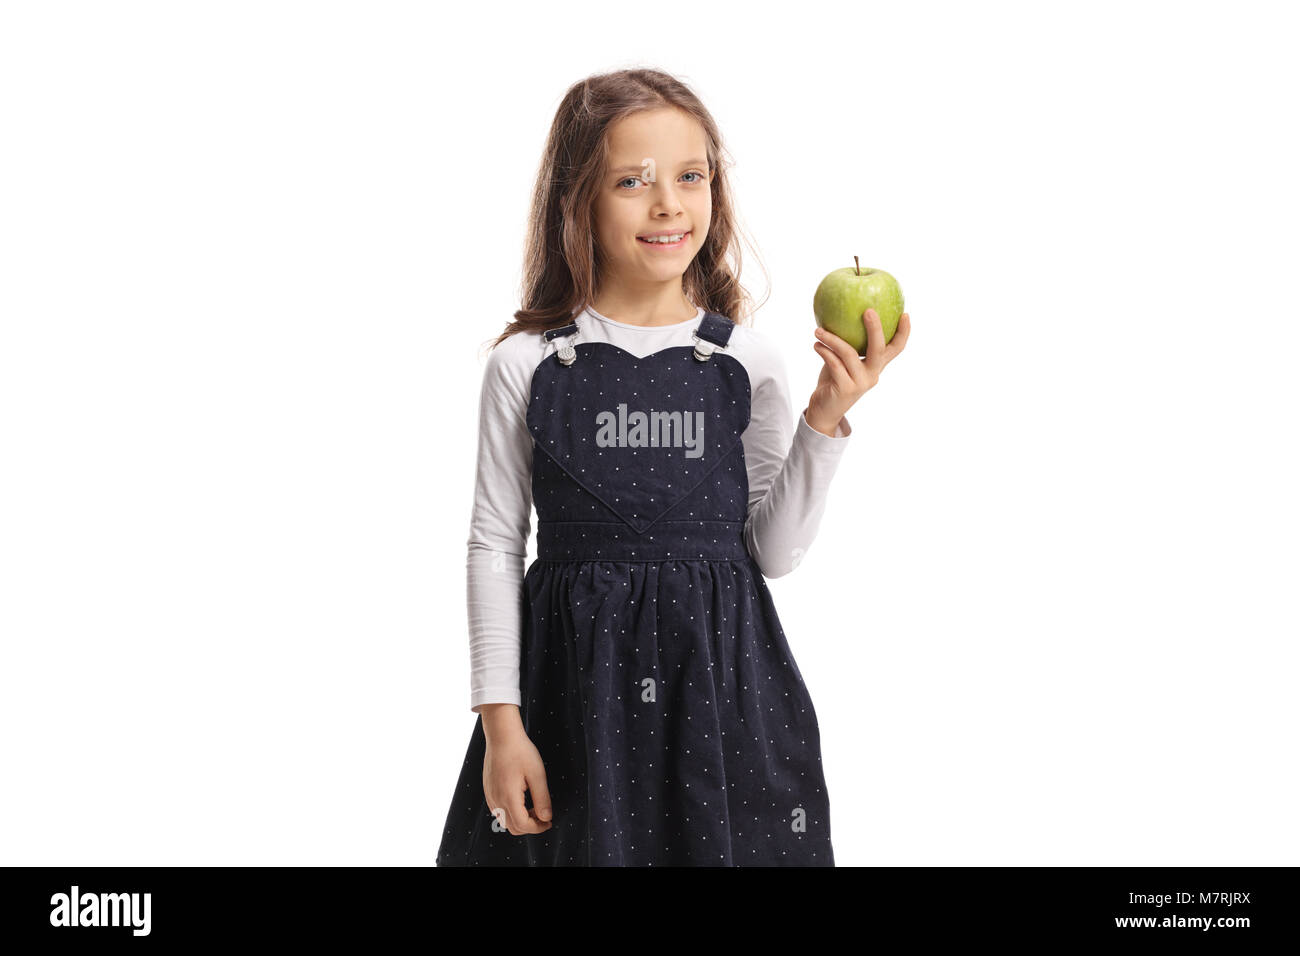 Cute little girl holding an apple and smiling isolated on white background Stock Photo